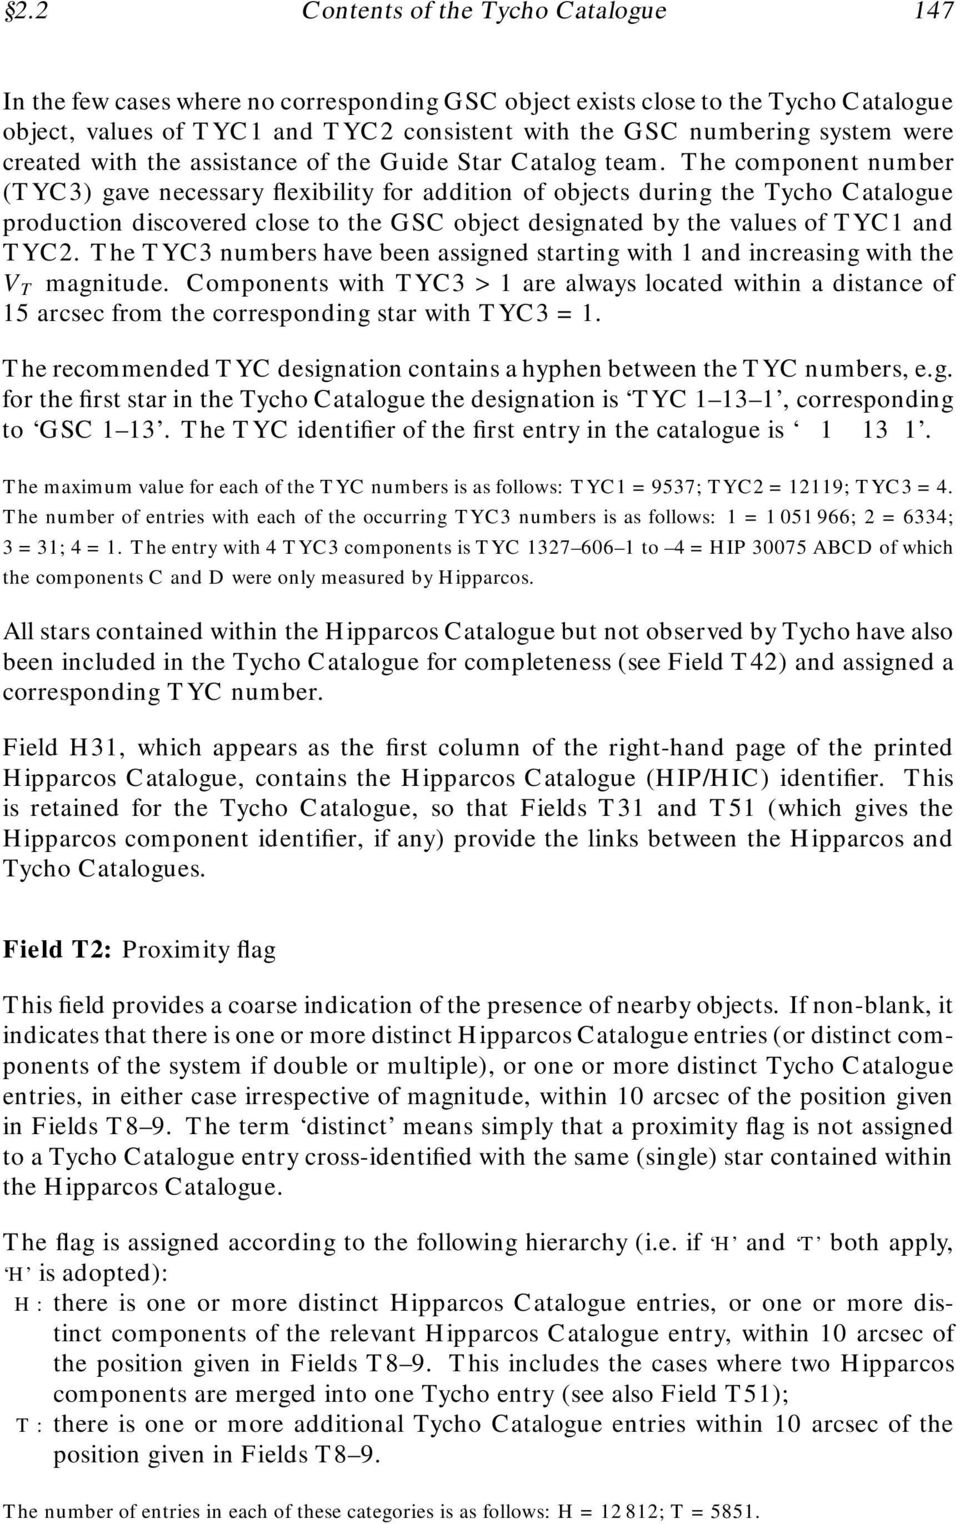 The component number (TYC3) gave necessary flexibility for addition of objects during the Tycho Catalogue production discovered close to the GSC object designated by the values of TYC1 and TYC2.